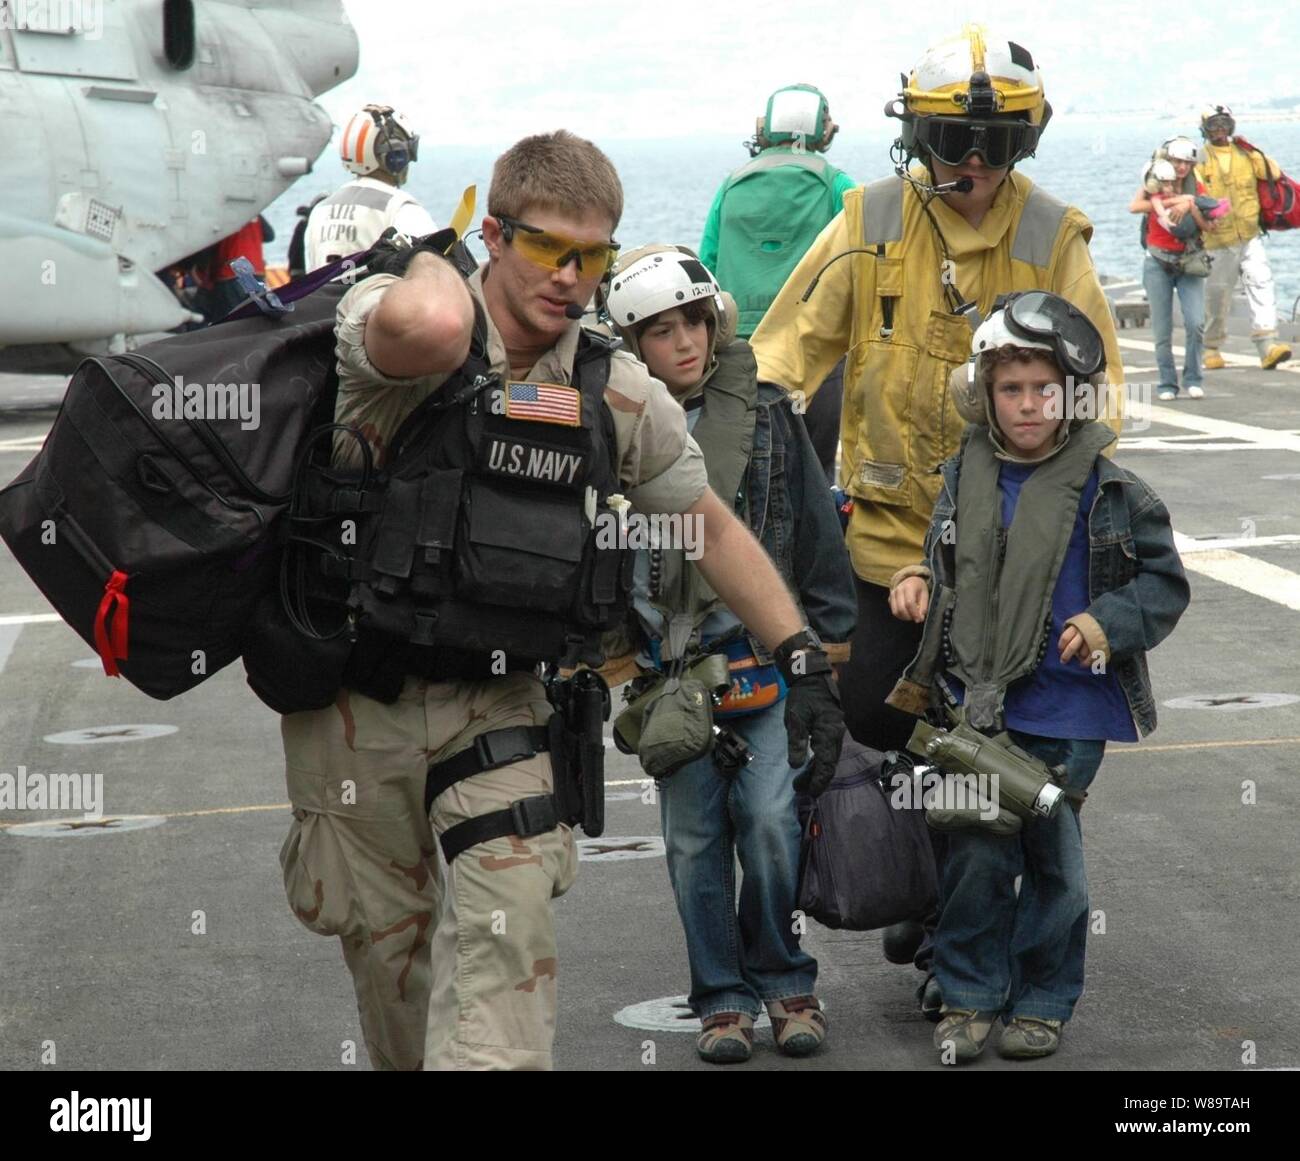 U.S. Navy sailors assist two young American citizens as they arrive on the flight deck of the USS Trenton (LPD 14) as the ship operates off the coast of Lebanon on July 21, 2006.  At the request of the U.S. Ambassador to Lebanon and at the direction of the Secretary of Defense, the United States Central Command and elements of Task Force 59 are assisting with the departure of U.S. citizens from Lebanon.  The Trenton is an amphibious transport which is used to carry and land Marines, their equipment and supplies by embarked air cushion or conventional landing craft, amphibious vehicles, helicop Stock Photo